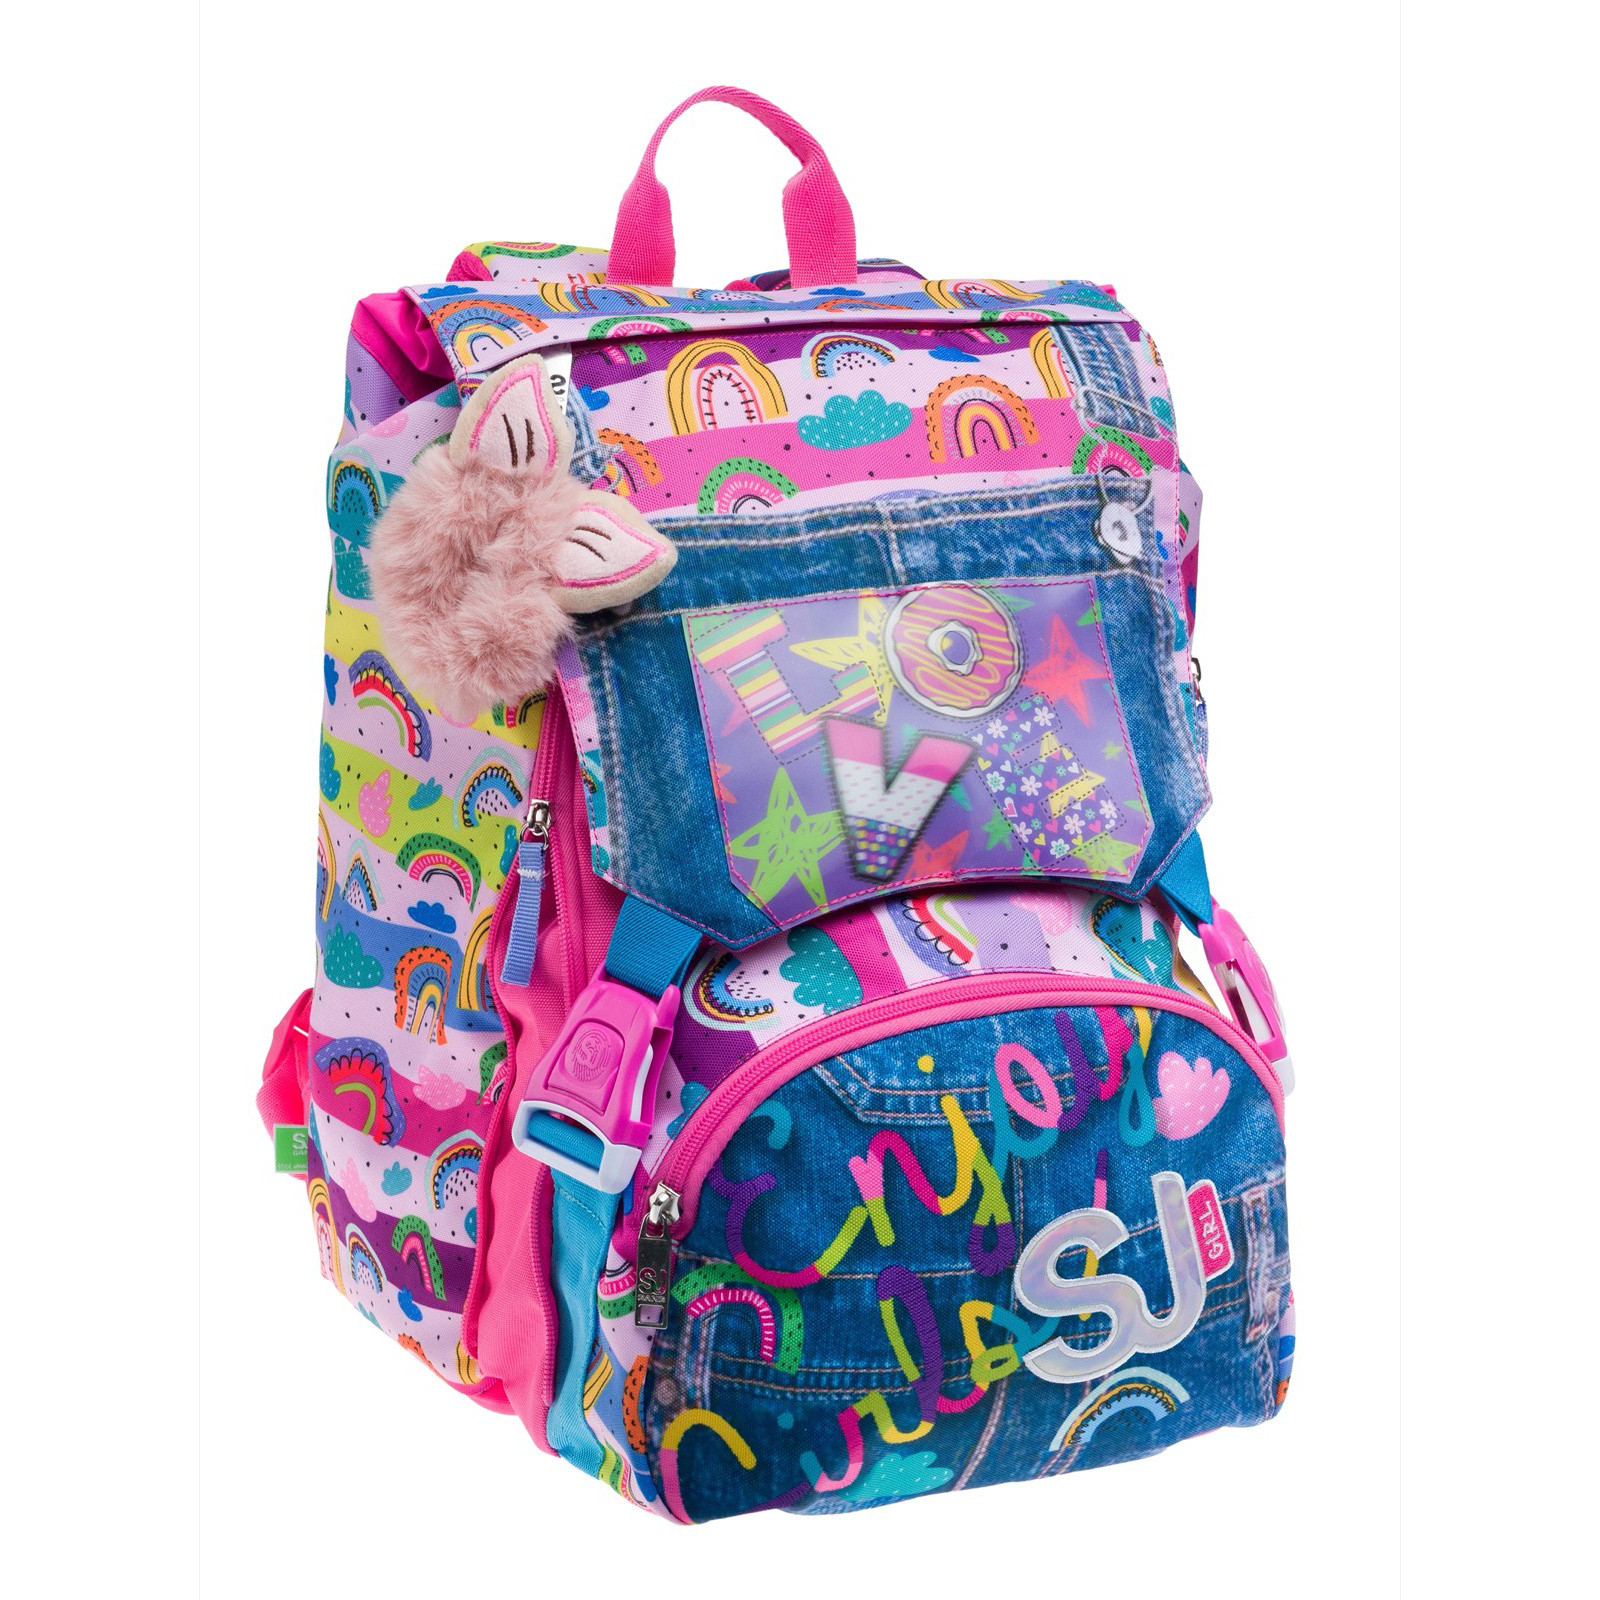 Backpack extensible sj gang colorbow girl, Pink, large image number 0